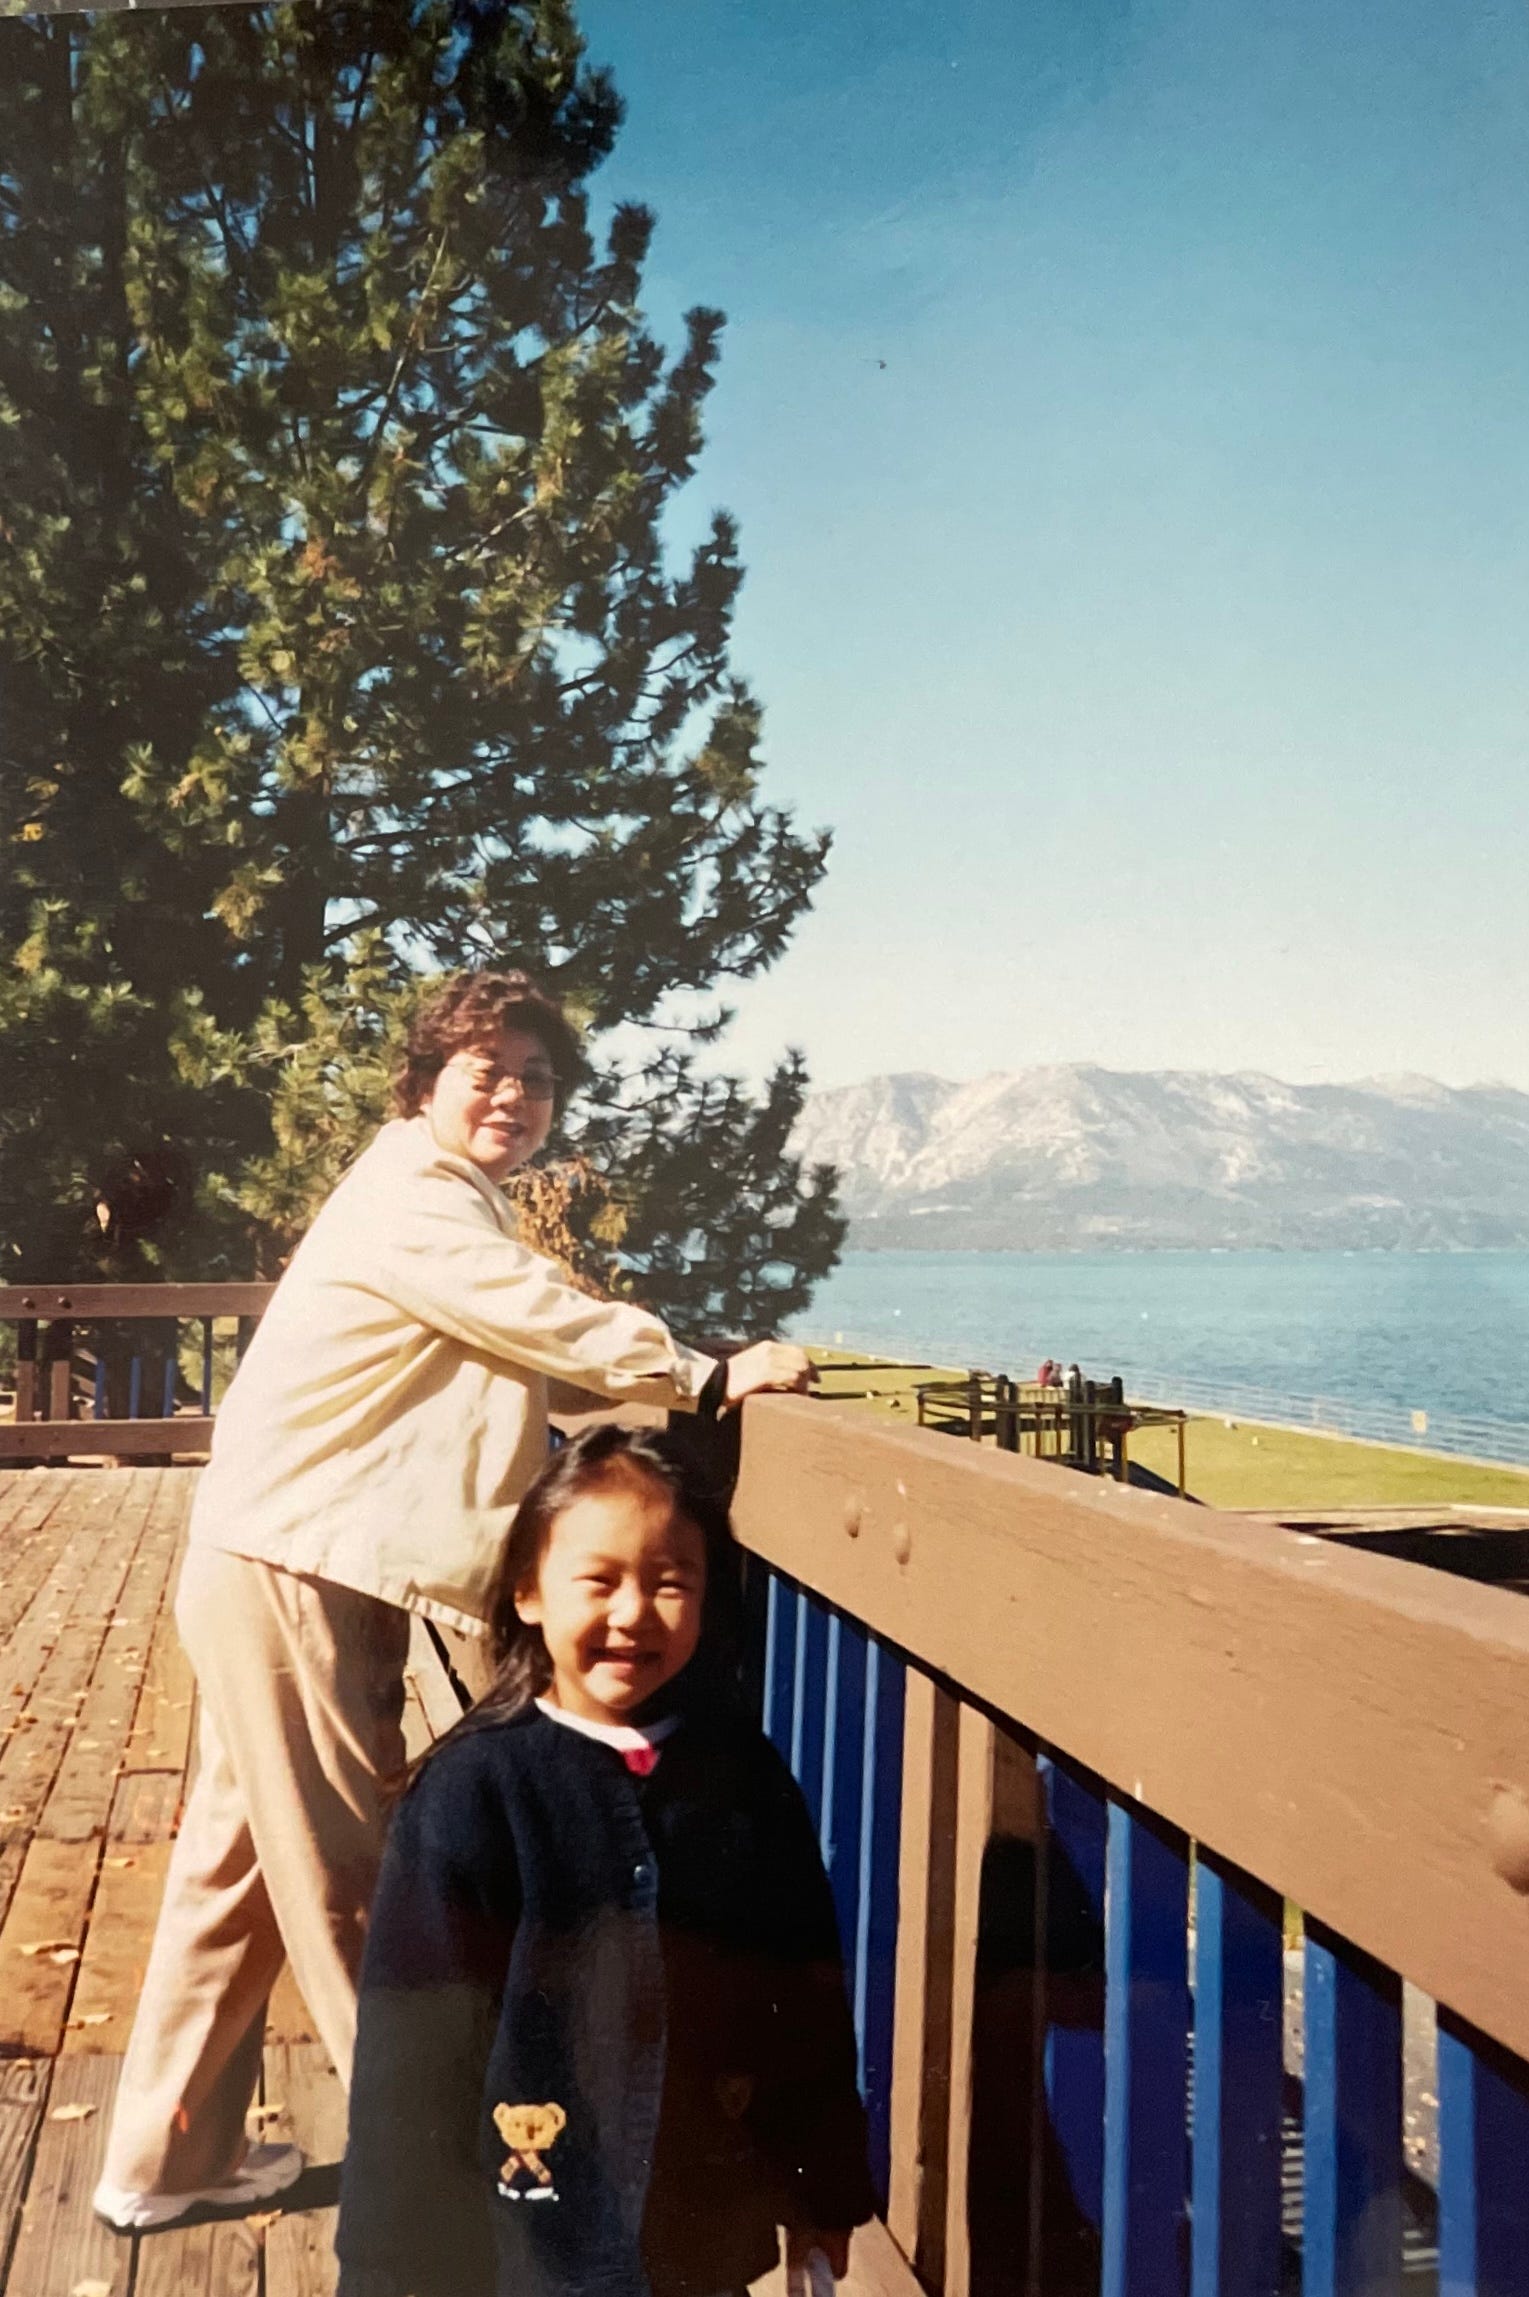 small 4 year old girl (me) wearing a navy cardigan with a small teddy bear embroidred on the pocket. she is in frame from the waist up. her grandma is standing behind her leaning on the wooden balcony of the deck they are standing on. grandma is dressed in head to toe tan jacket and pants, sneakers, and sunglasses. both are smiling at the camera. behind them both is a large pine tree, snowy mountains, and a very blue body of water.